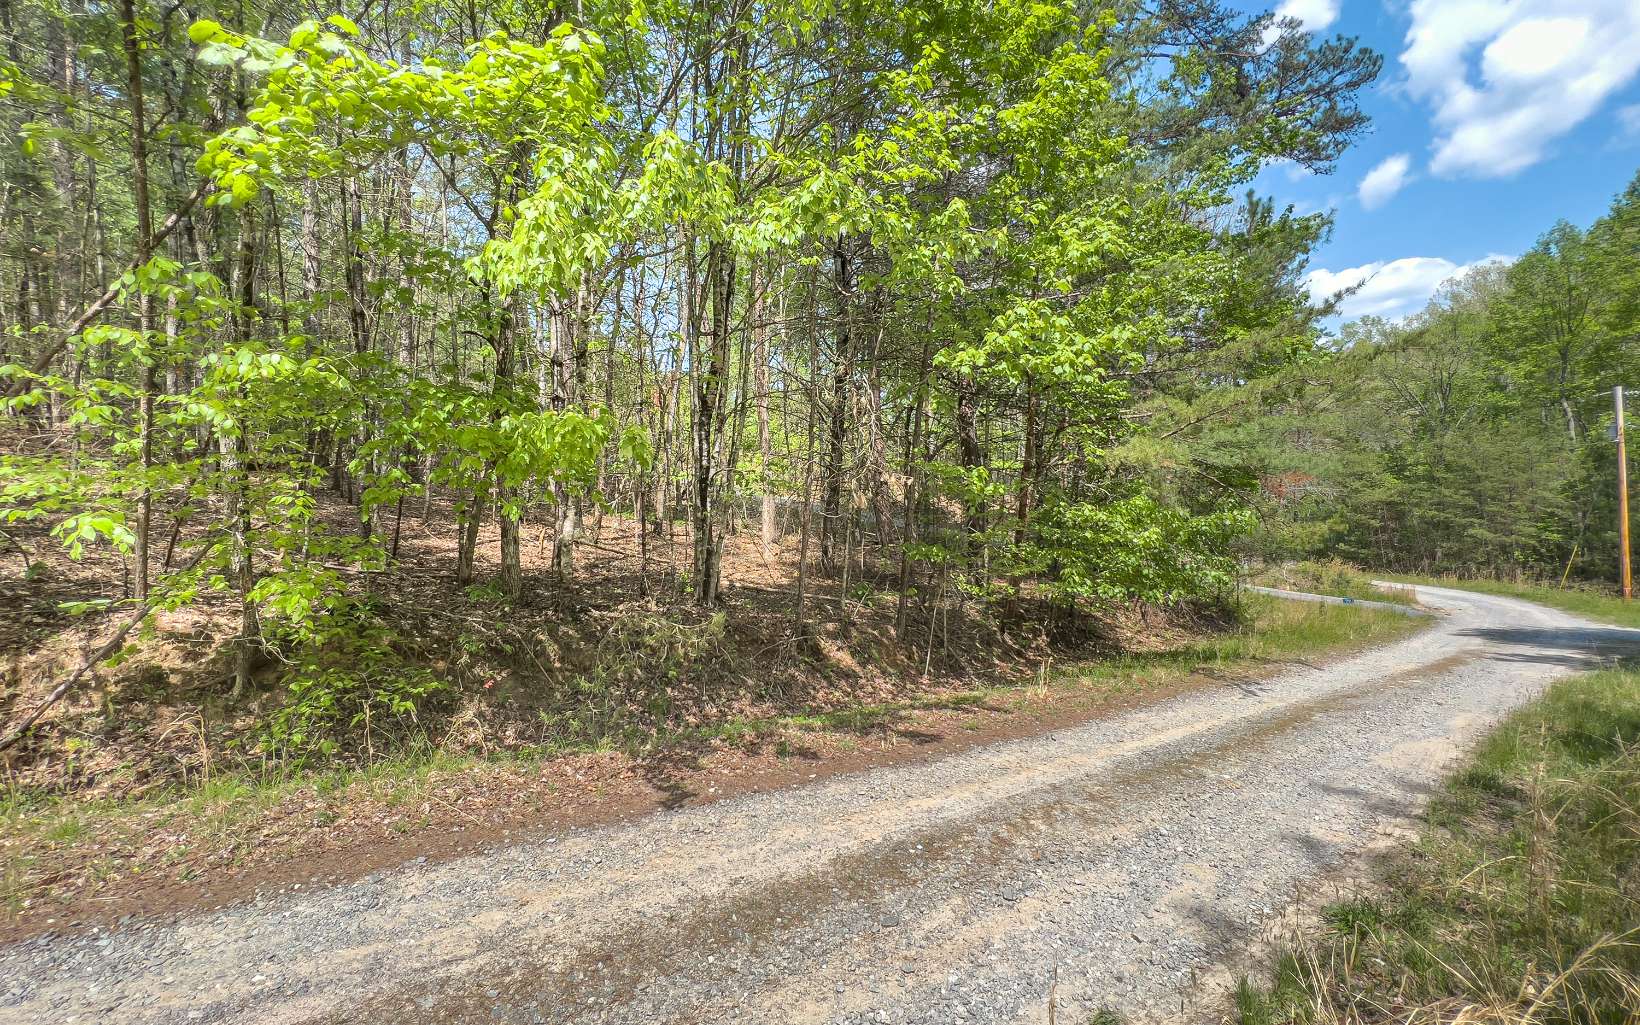 This 3.46 acre unrestricted lot has both Twin Springs Road access and Whisperwood Trail frontage. It has gentle wooded terrain with some mild slopes leading to the road frontage on Whisperwood Trail. This neighborhood is secluded, but still fairly close to Blue Ridge, McCaysville, and Ducktown, with all of their shopping areas, parks, and Toccoa/Ocoee River access points.Four neighboring parcels are also listed. See Docs for locations (this listing parcel will have a star icon). Special Consideration will be provided if Buyer wants to purchase all 5 lots with over 15 AC and 300+ feet of Synacia Creek frontage. NEGA Listings 317949, 317950, 317951, 317952, 317953